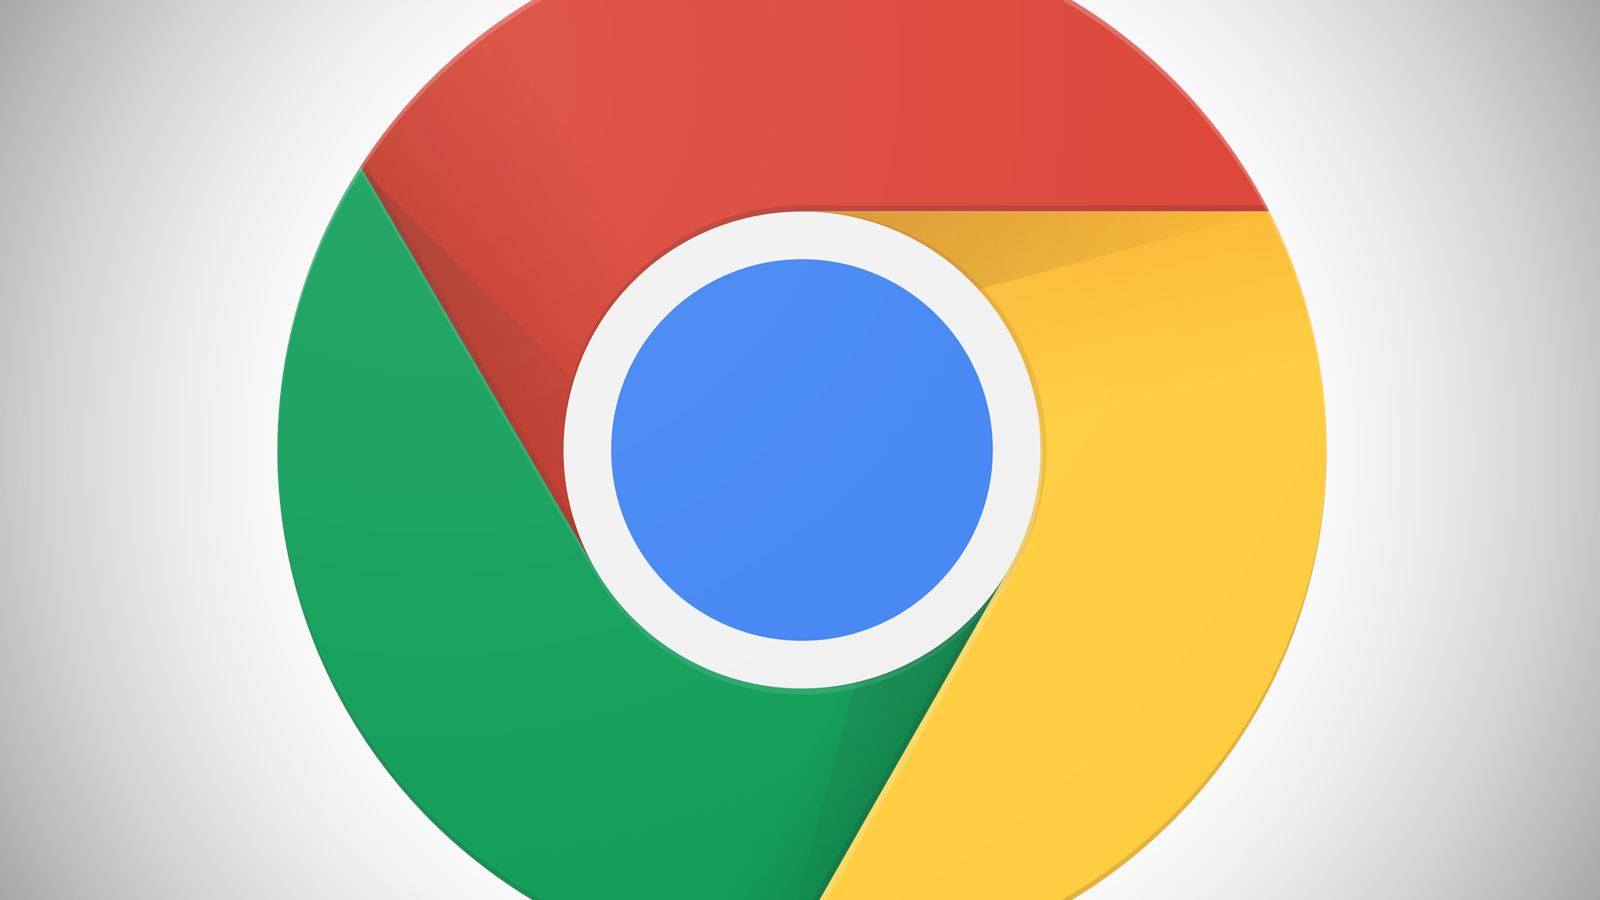 Chrome Market Share Hits 62%, While Firefox Dips Below 10%